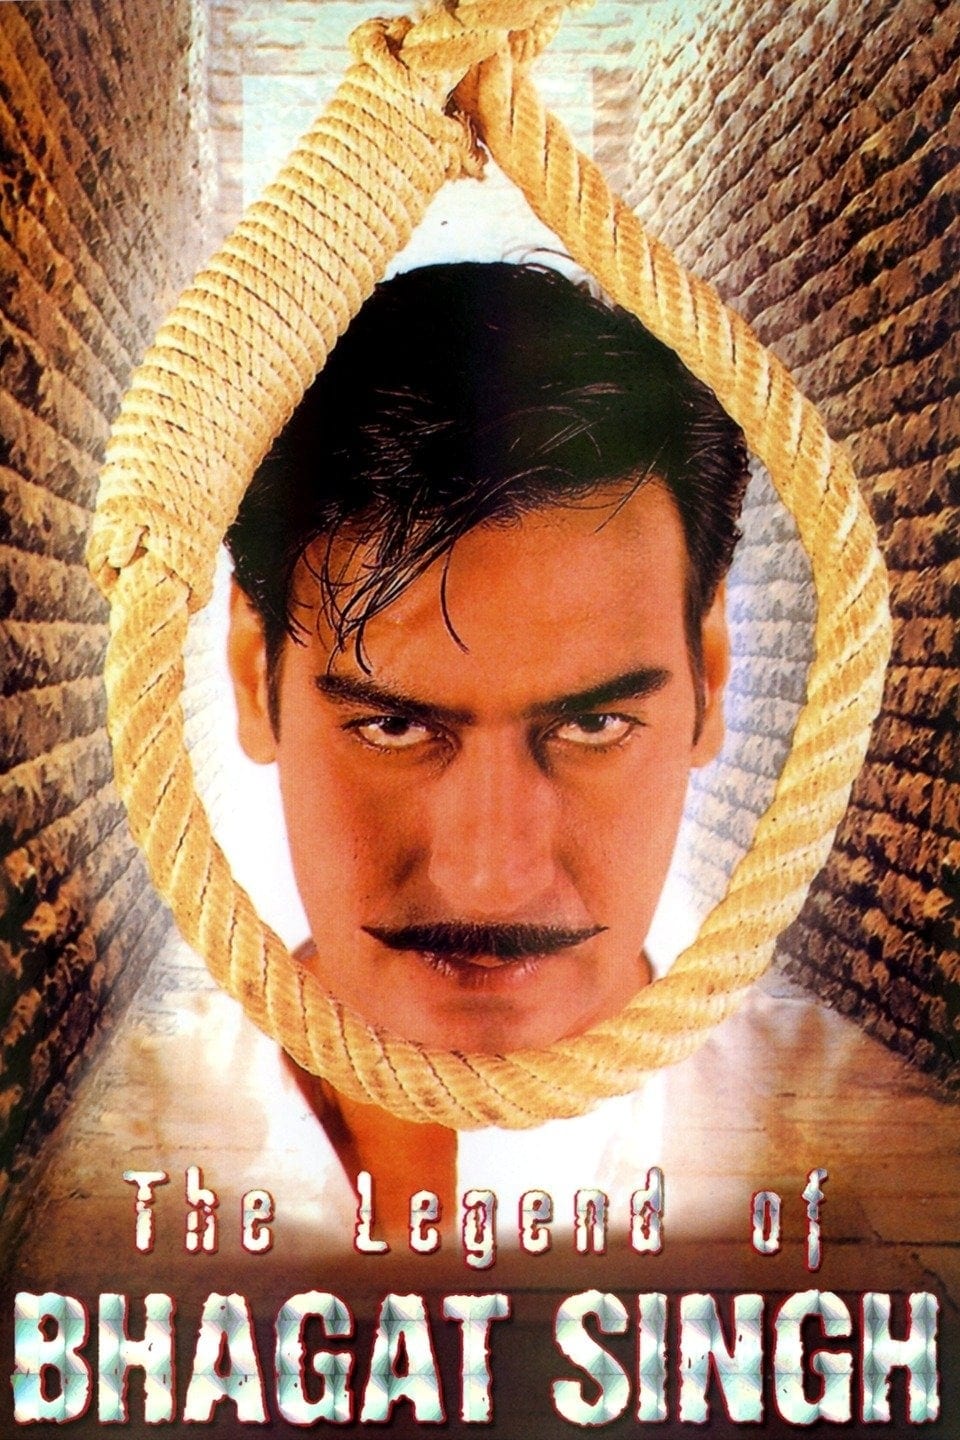 Poster for the movie "The Legend of Bhagat Singh"